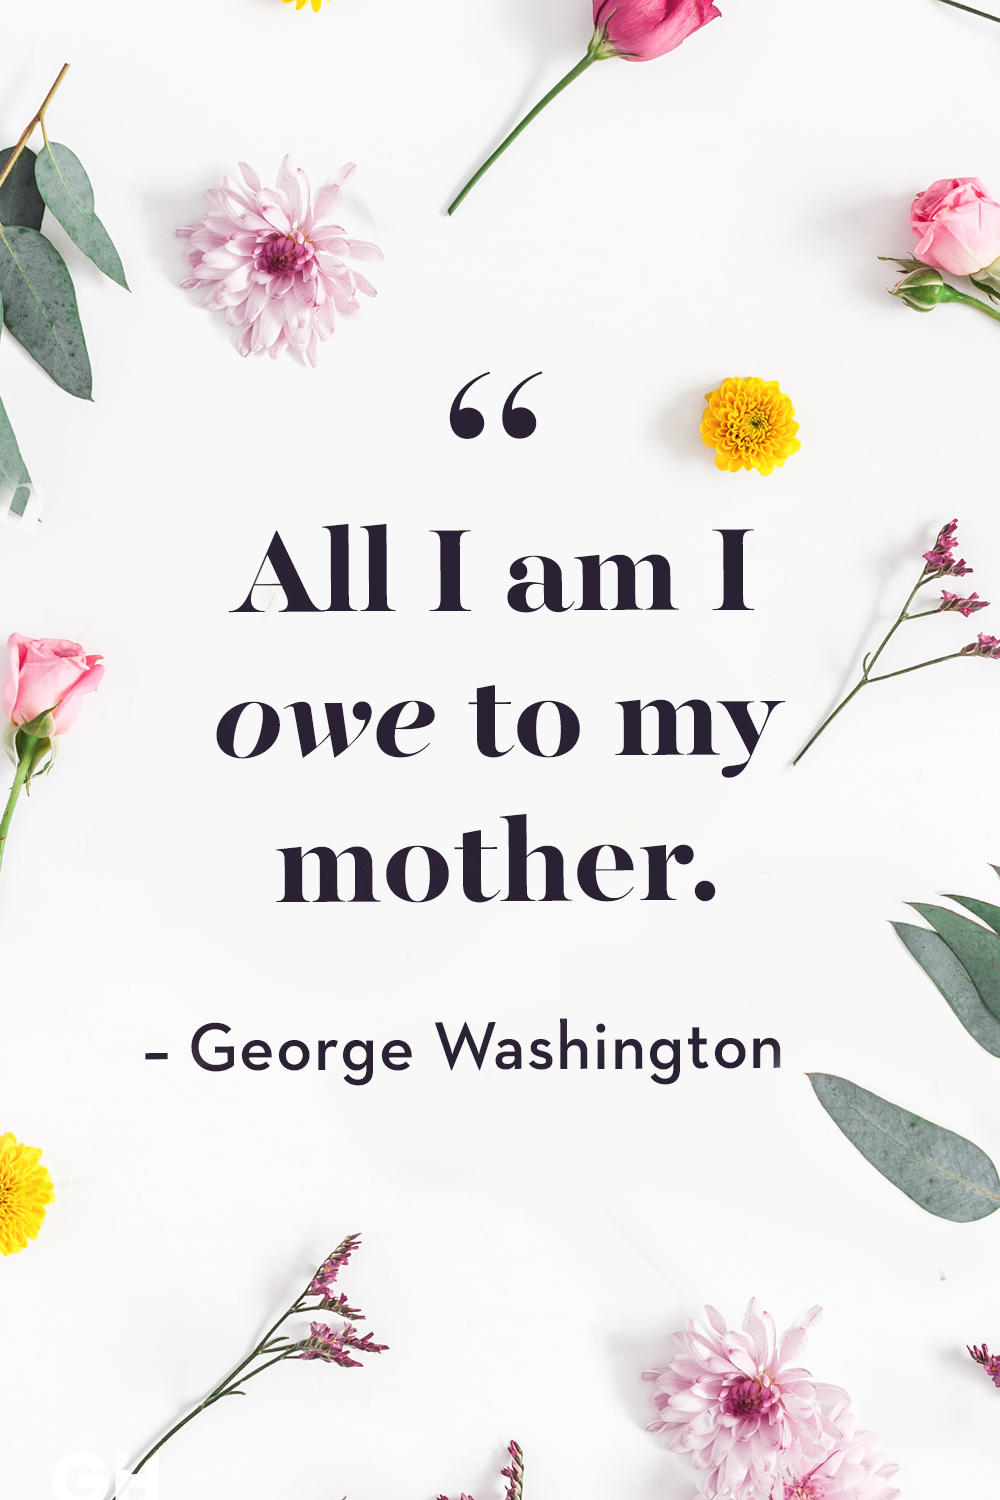 35 Best Mother's Day Quotes - Heartfelt Mom Sayings and Poems for ...